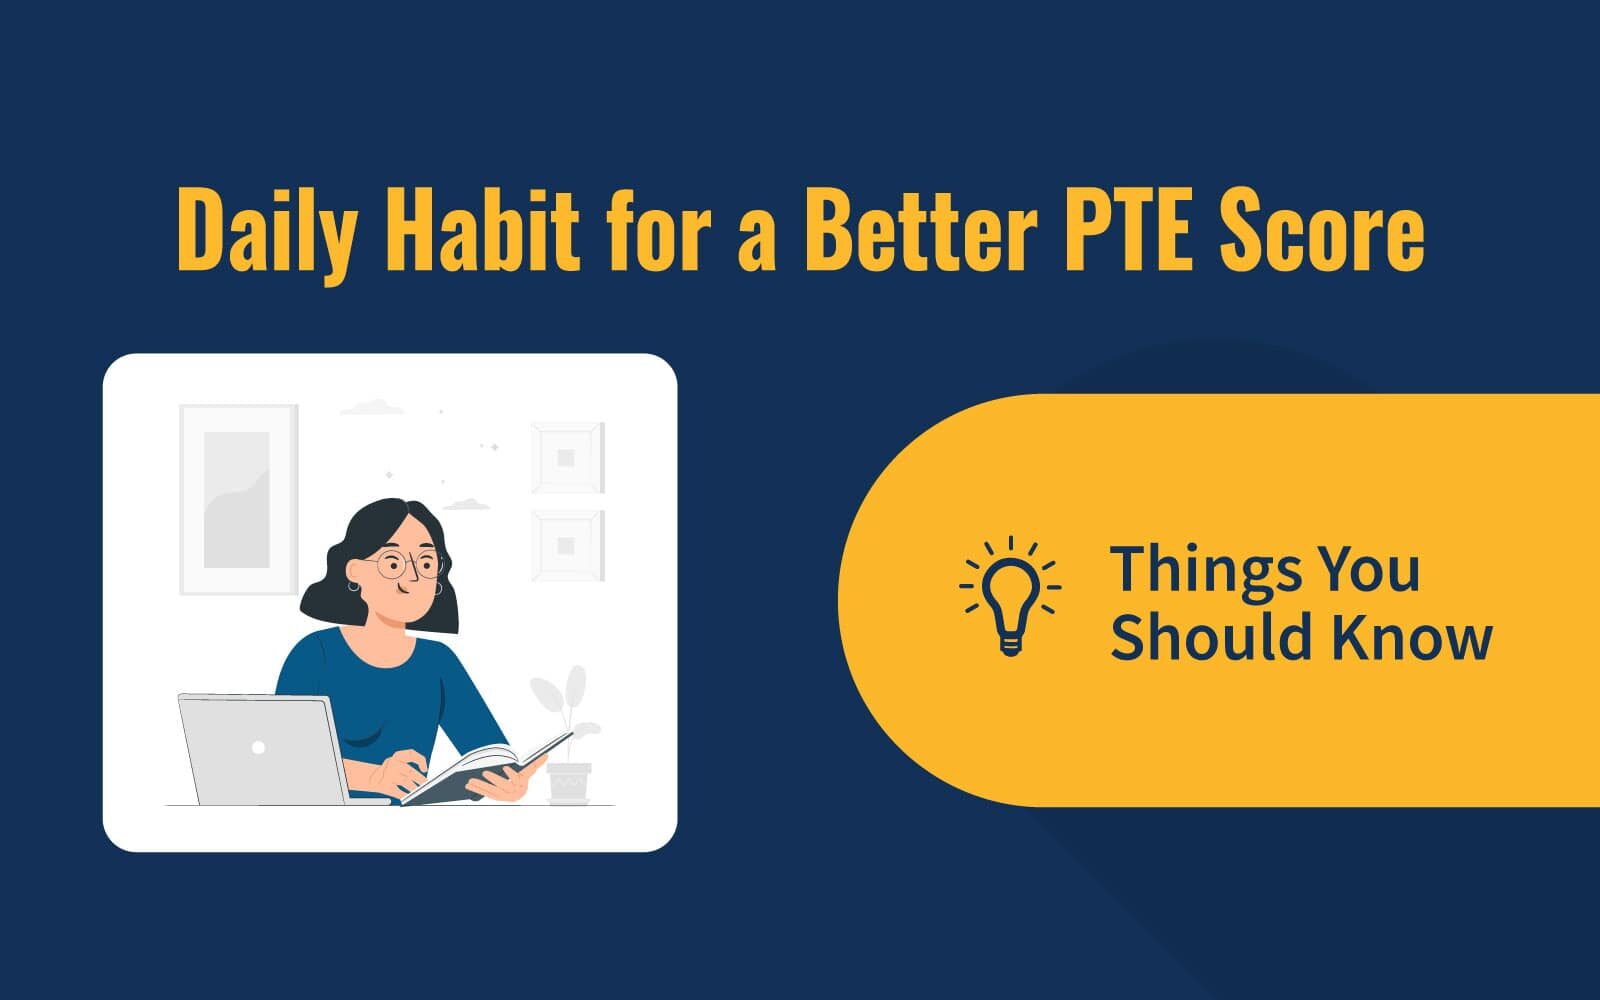 Daily Habit for a Better PTE Score